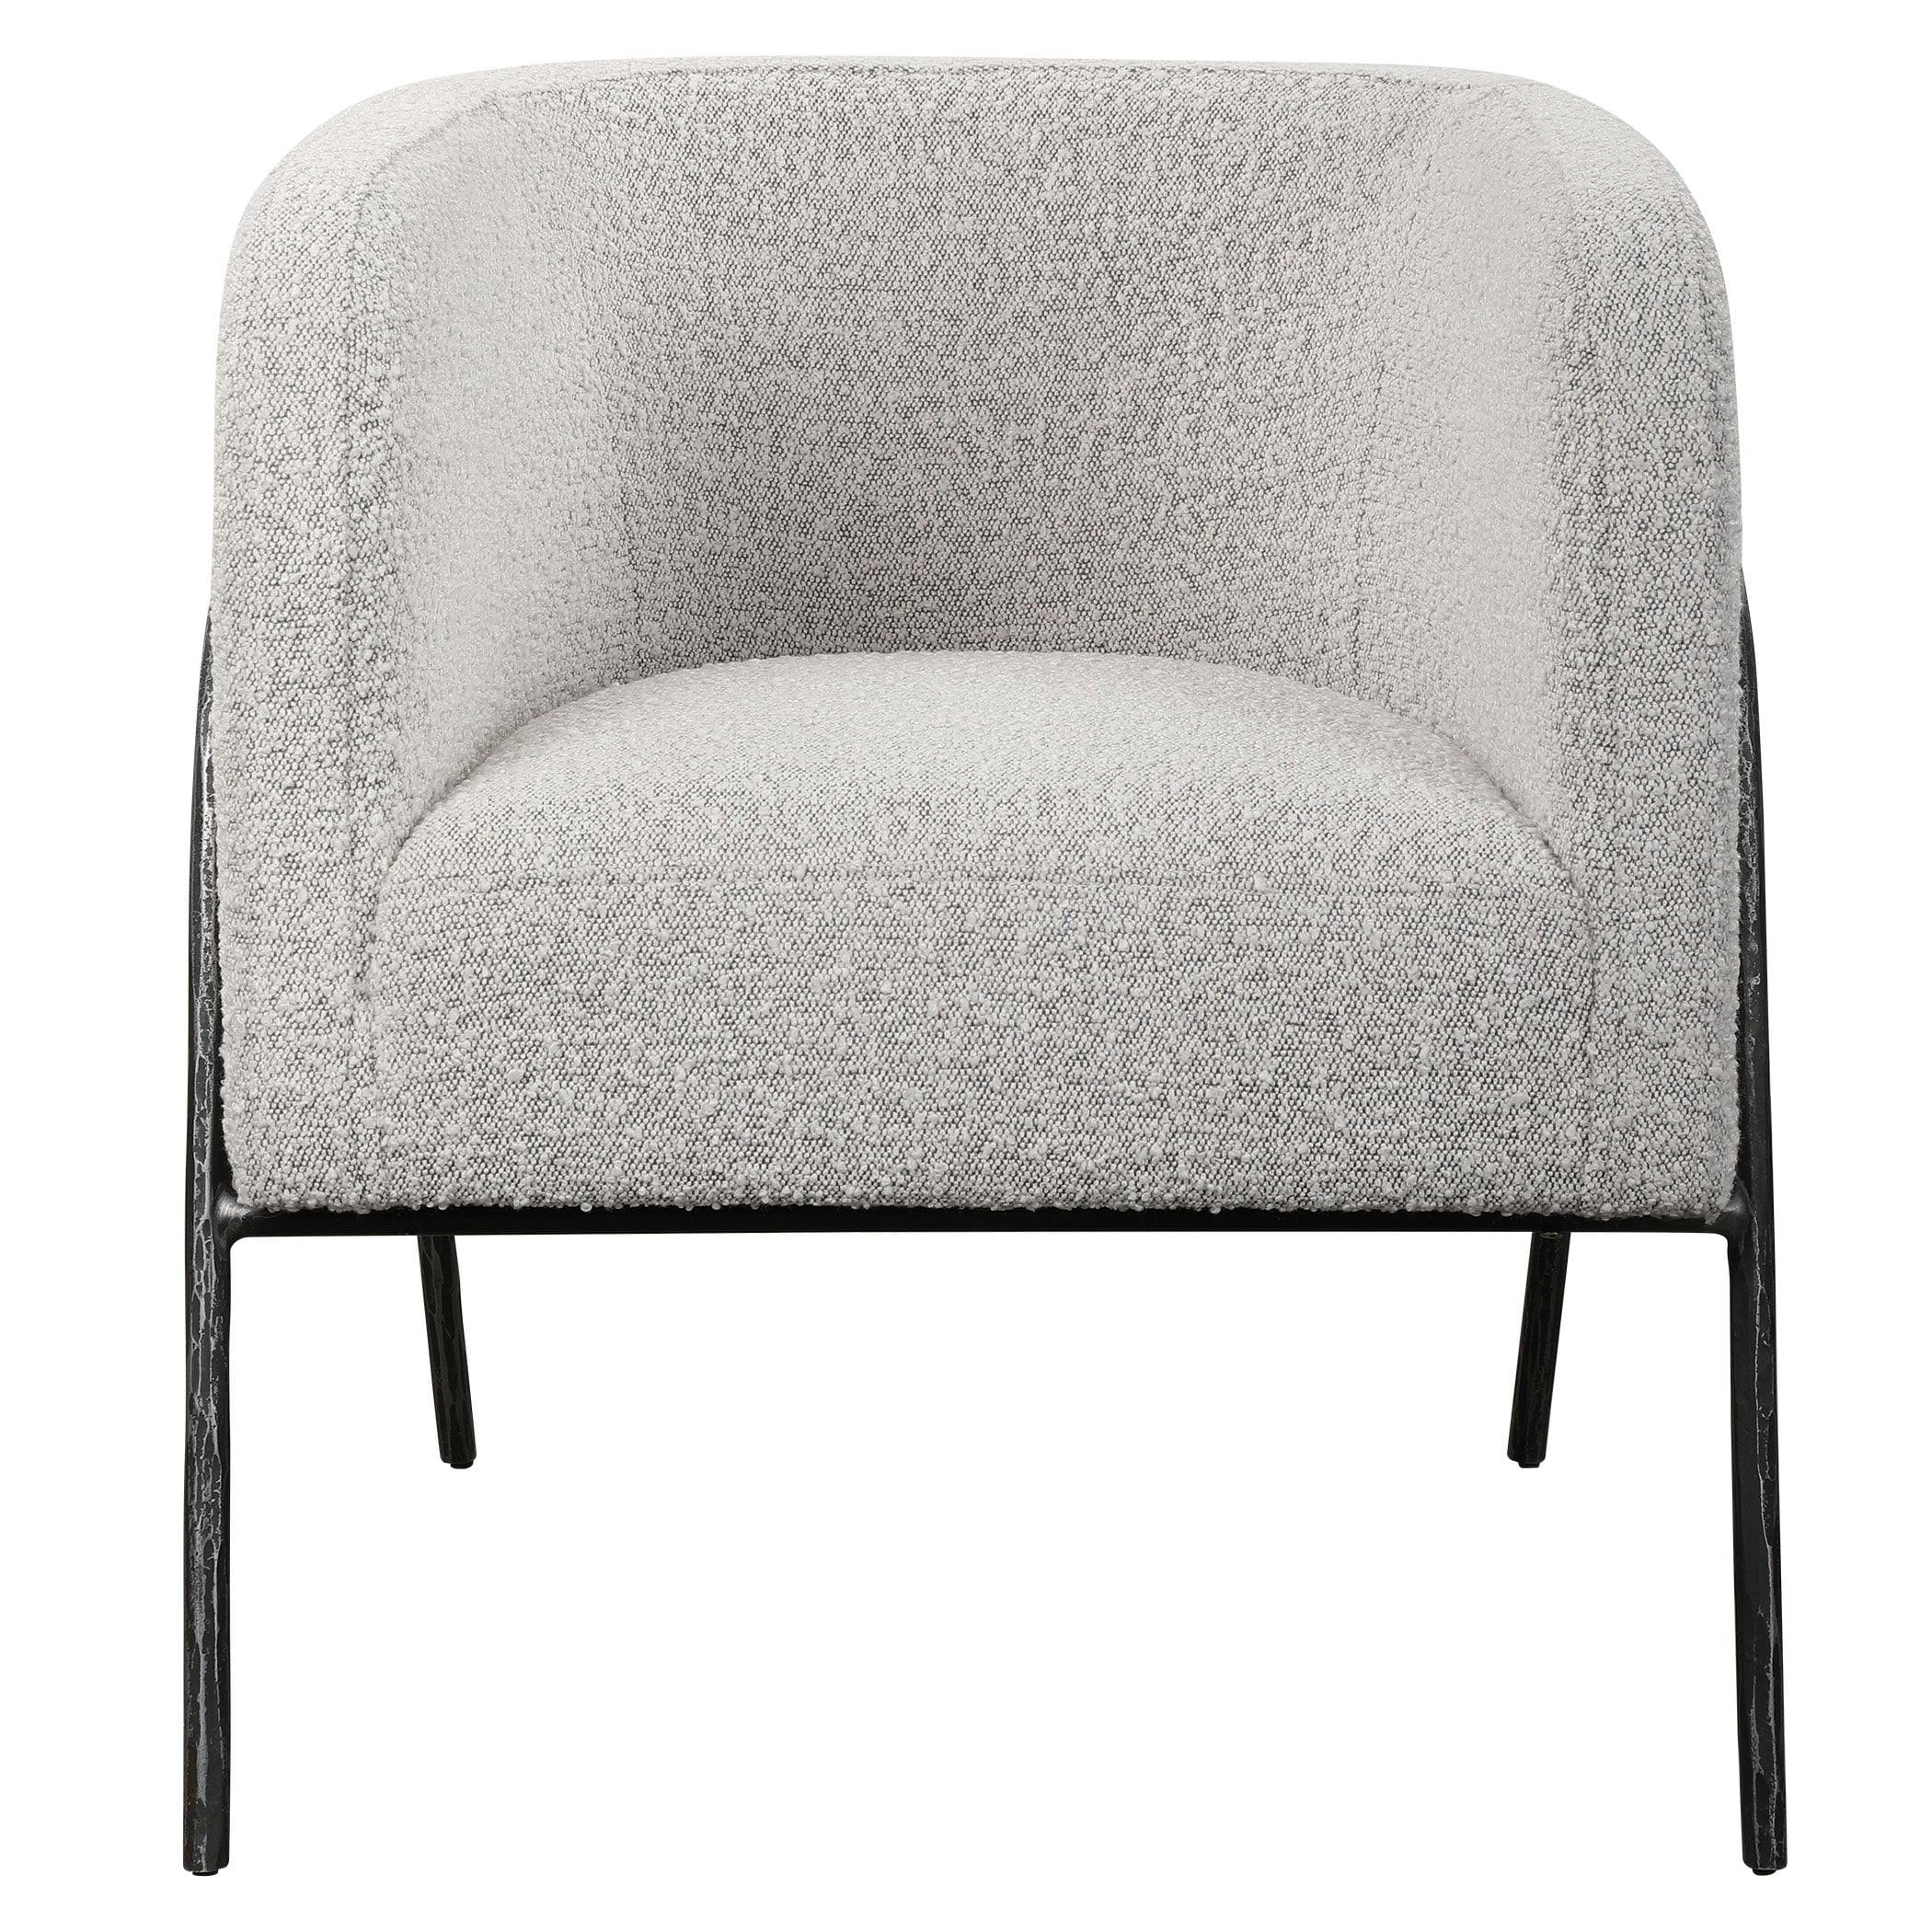 Scandinavian Inspired Gray Barrel Accent Chair with Metal Frame